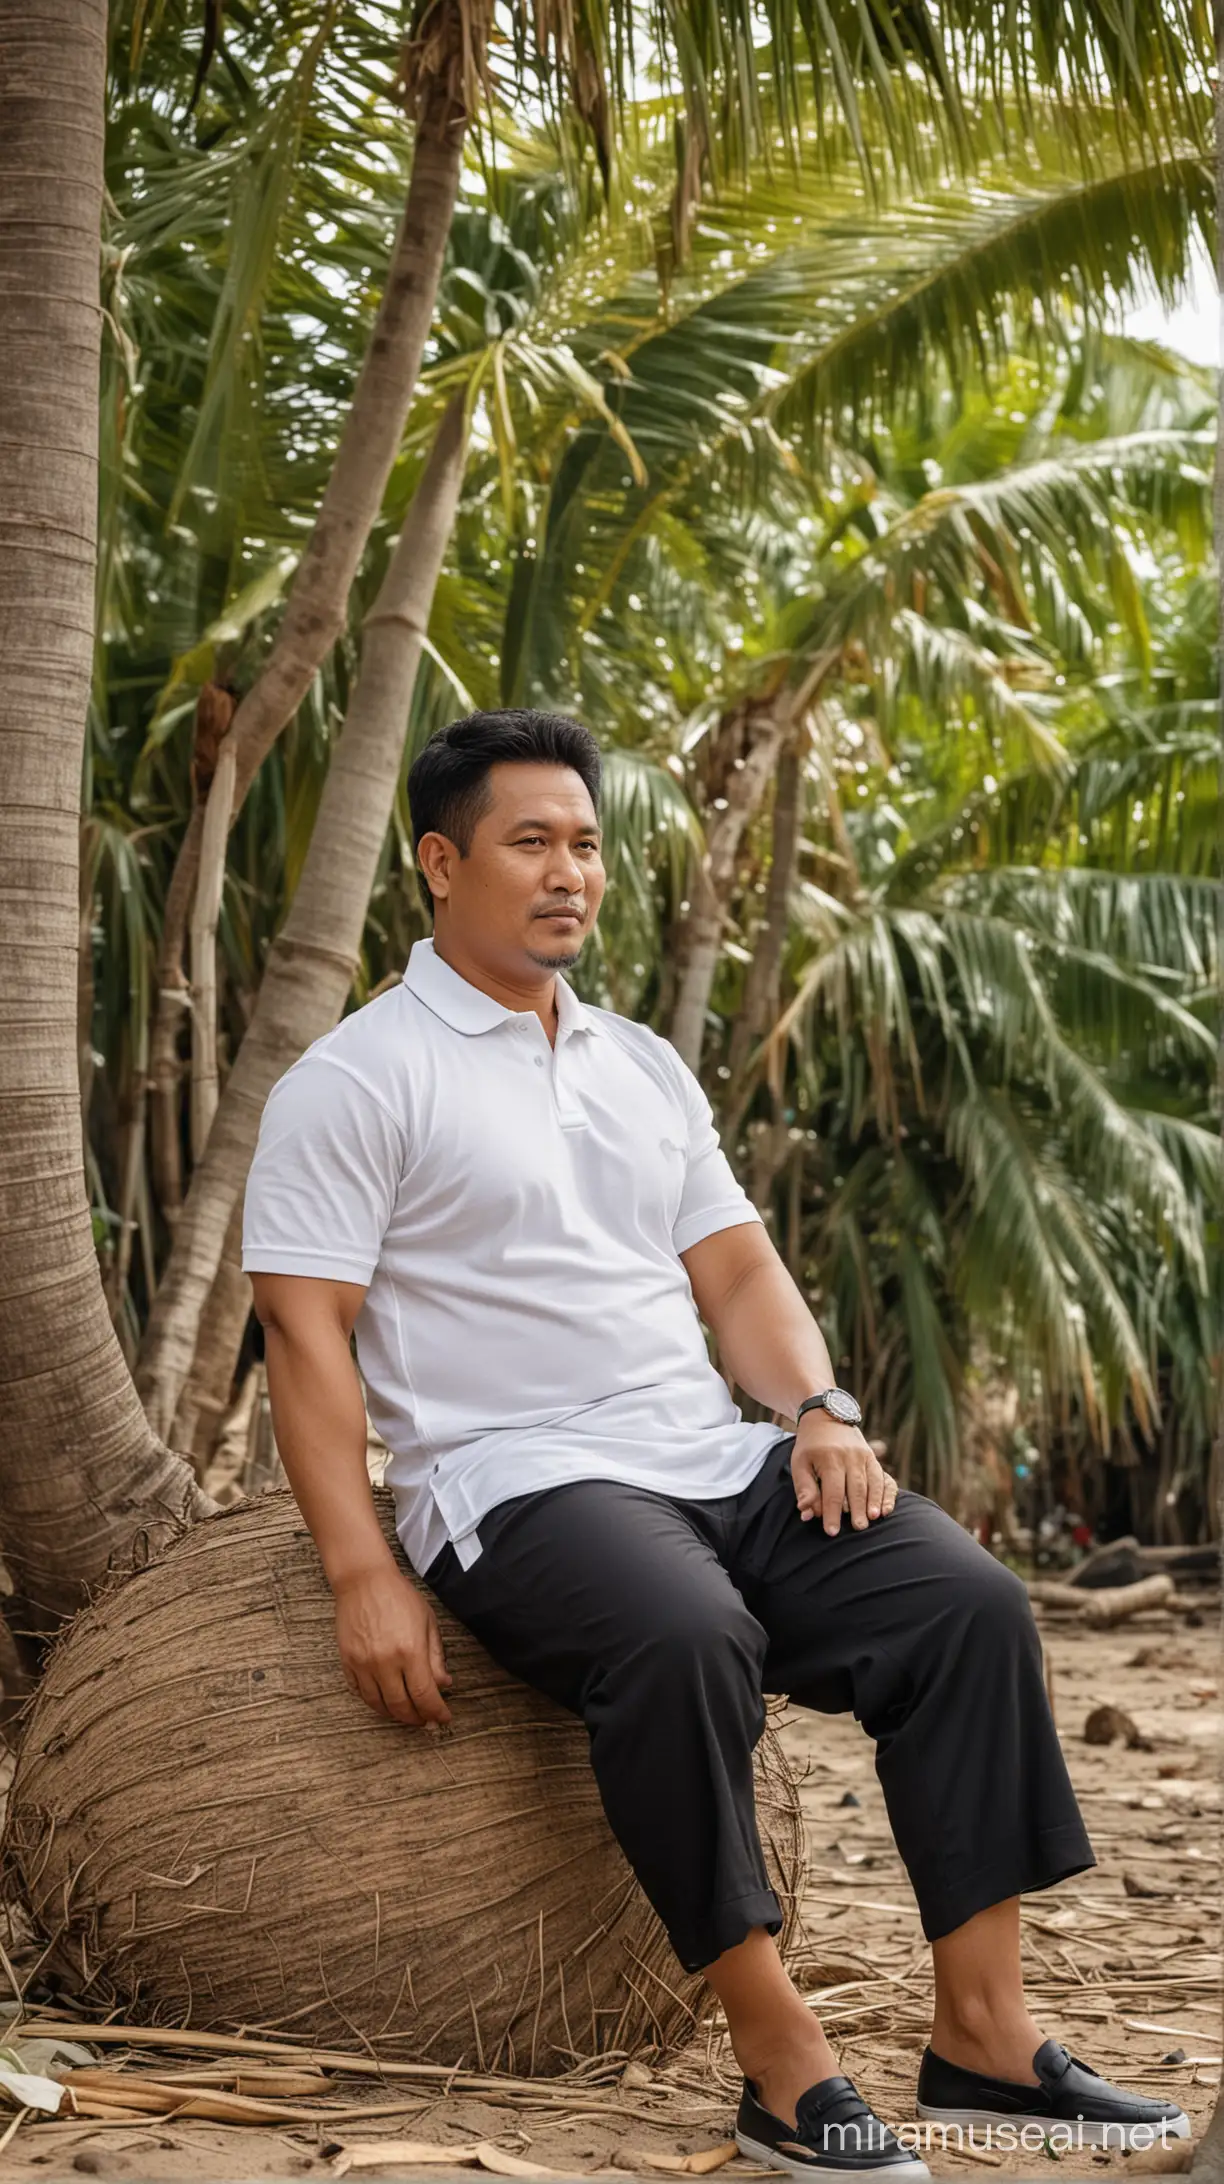 Indonesian Man Relaxing Under Coconut Tree in White Polo Shirt